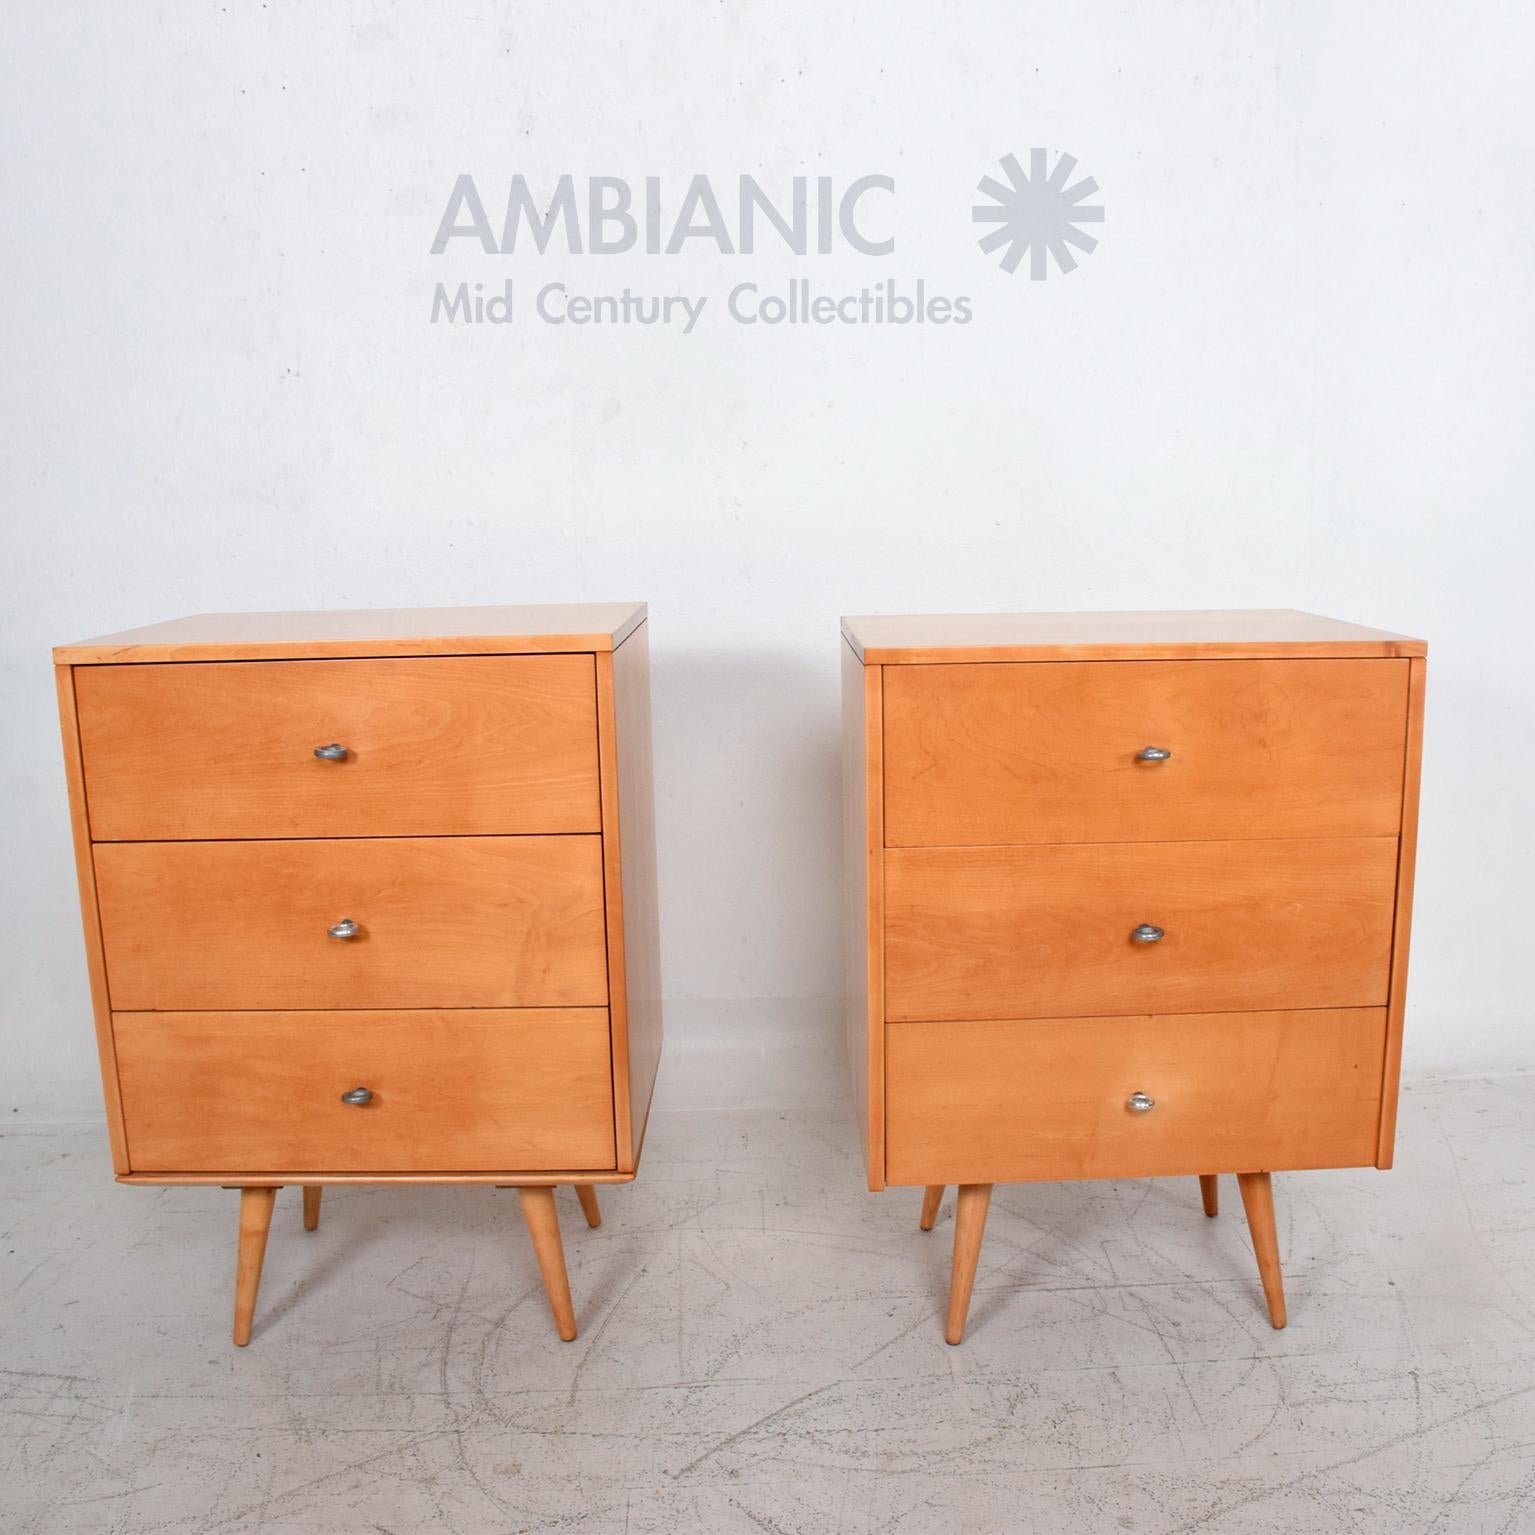 For your consideration: A pair of Paul McCobb lacquered maple wood single dressers. By Planner Group Design series, USA, 1950s. Winchendon Furniture.

Solid lacquered maple wood with McCobb Classic feature of aluminum silver ring pulls. All